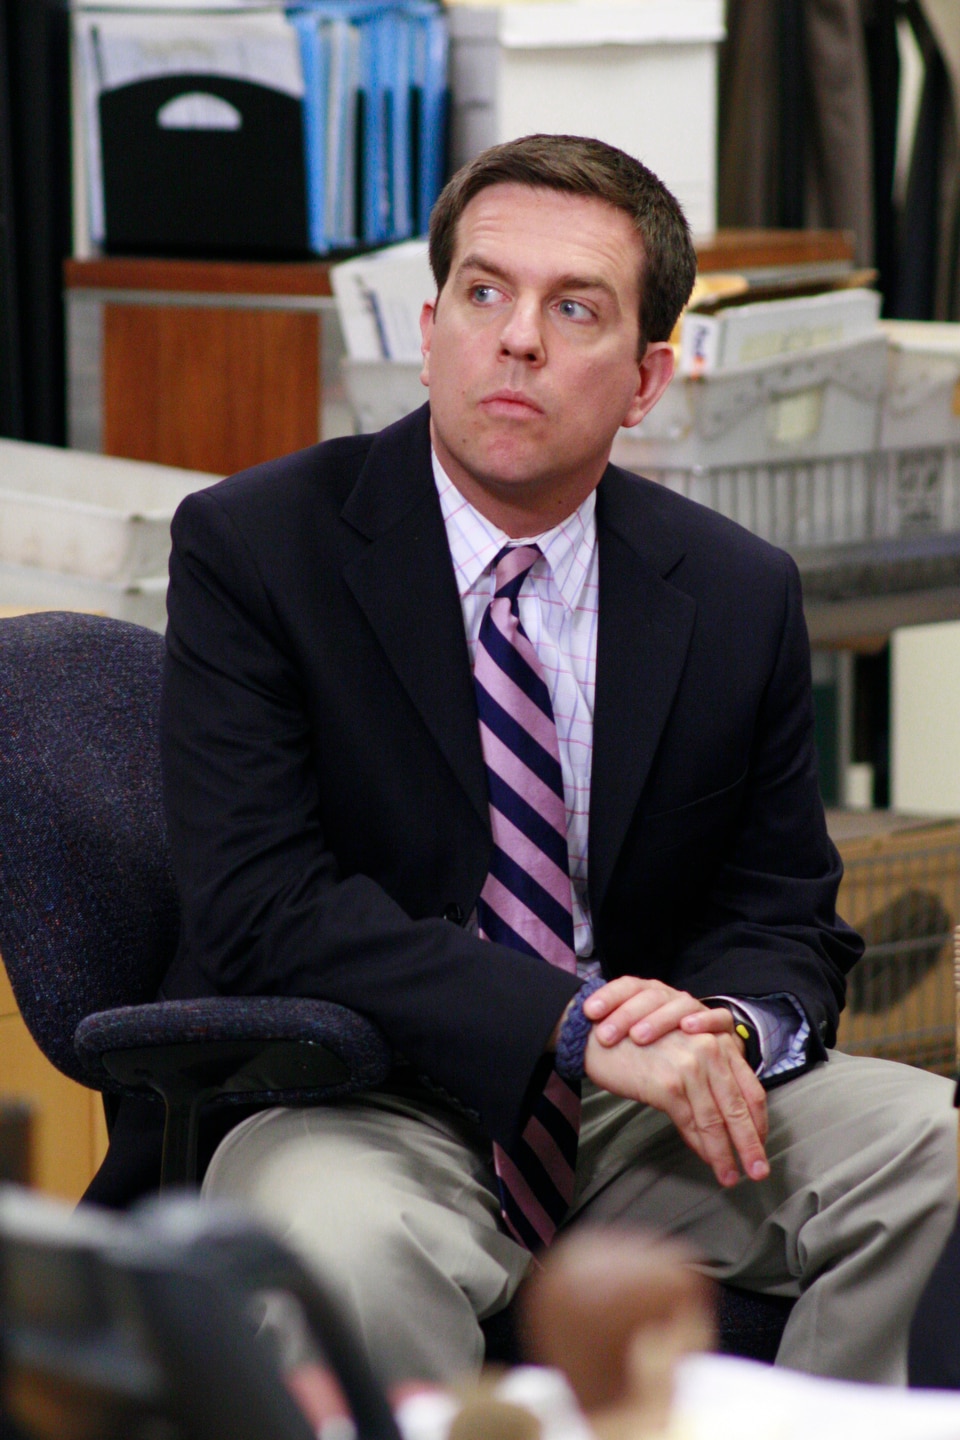 Dunder Mifflin Infinity (Web site), Dunderpedia: The Office Wiki